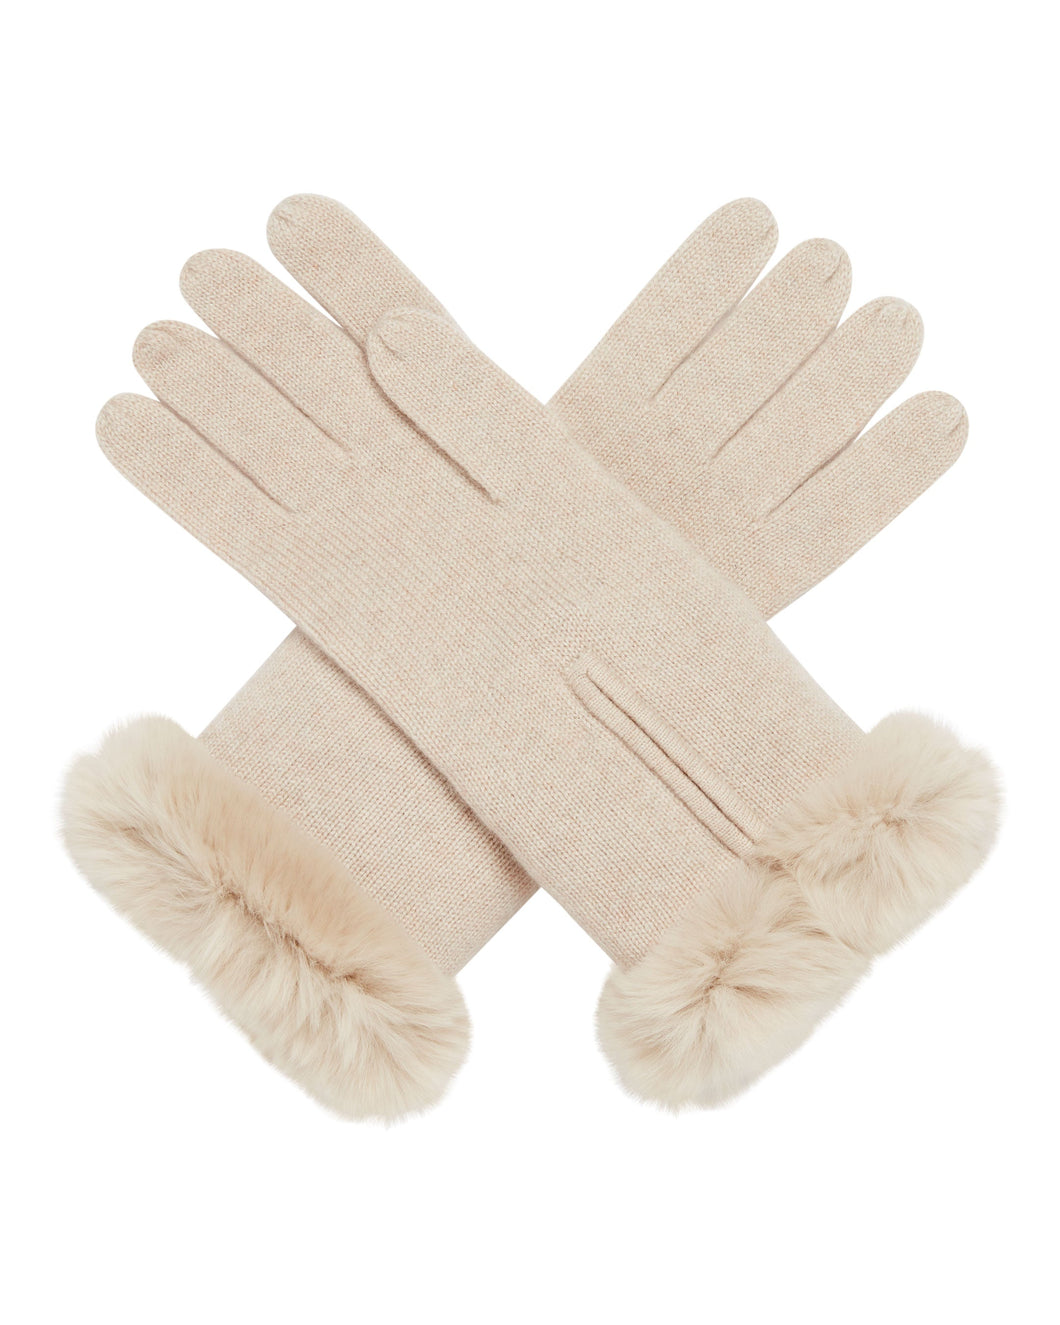 N.Peal Women's Fur And Cashmere Gloves Heather Beige Brown